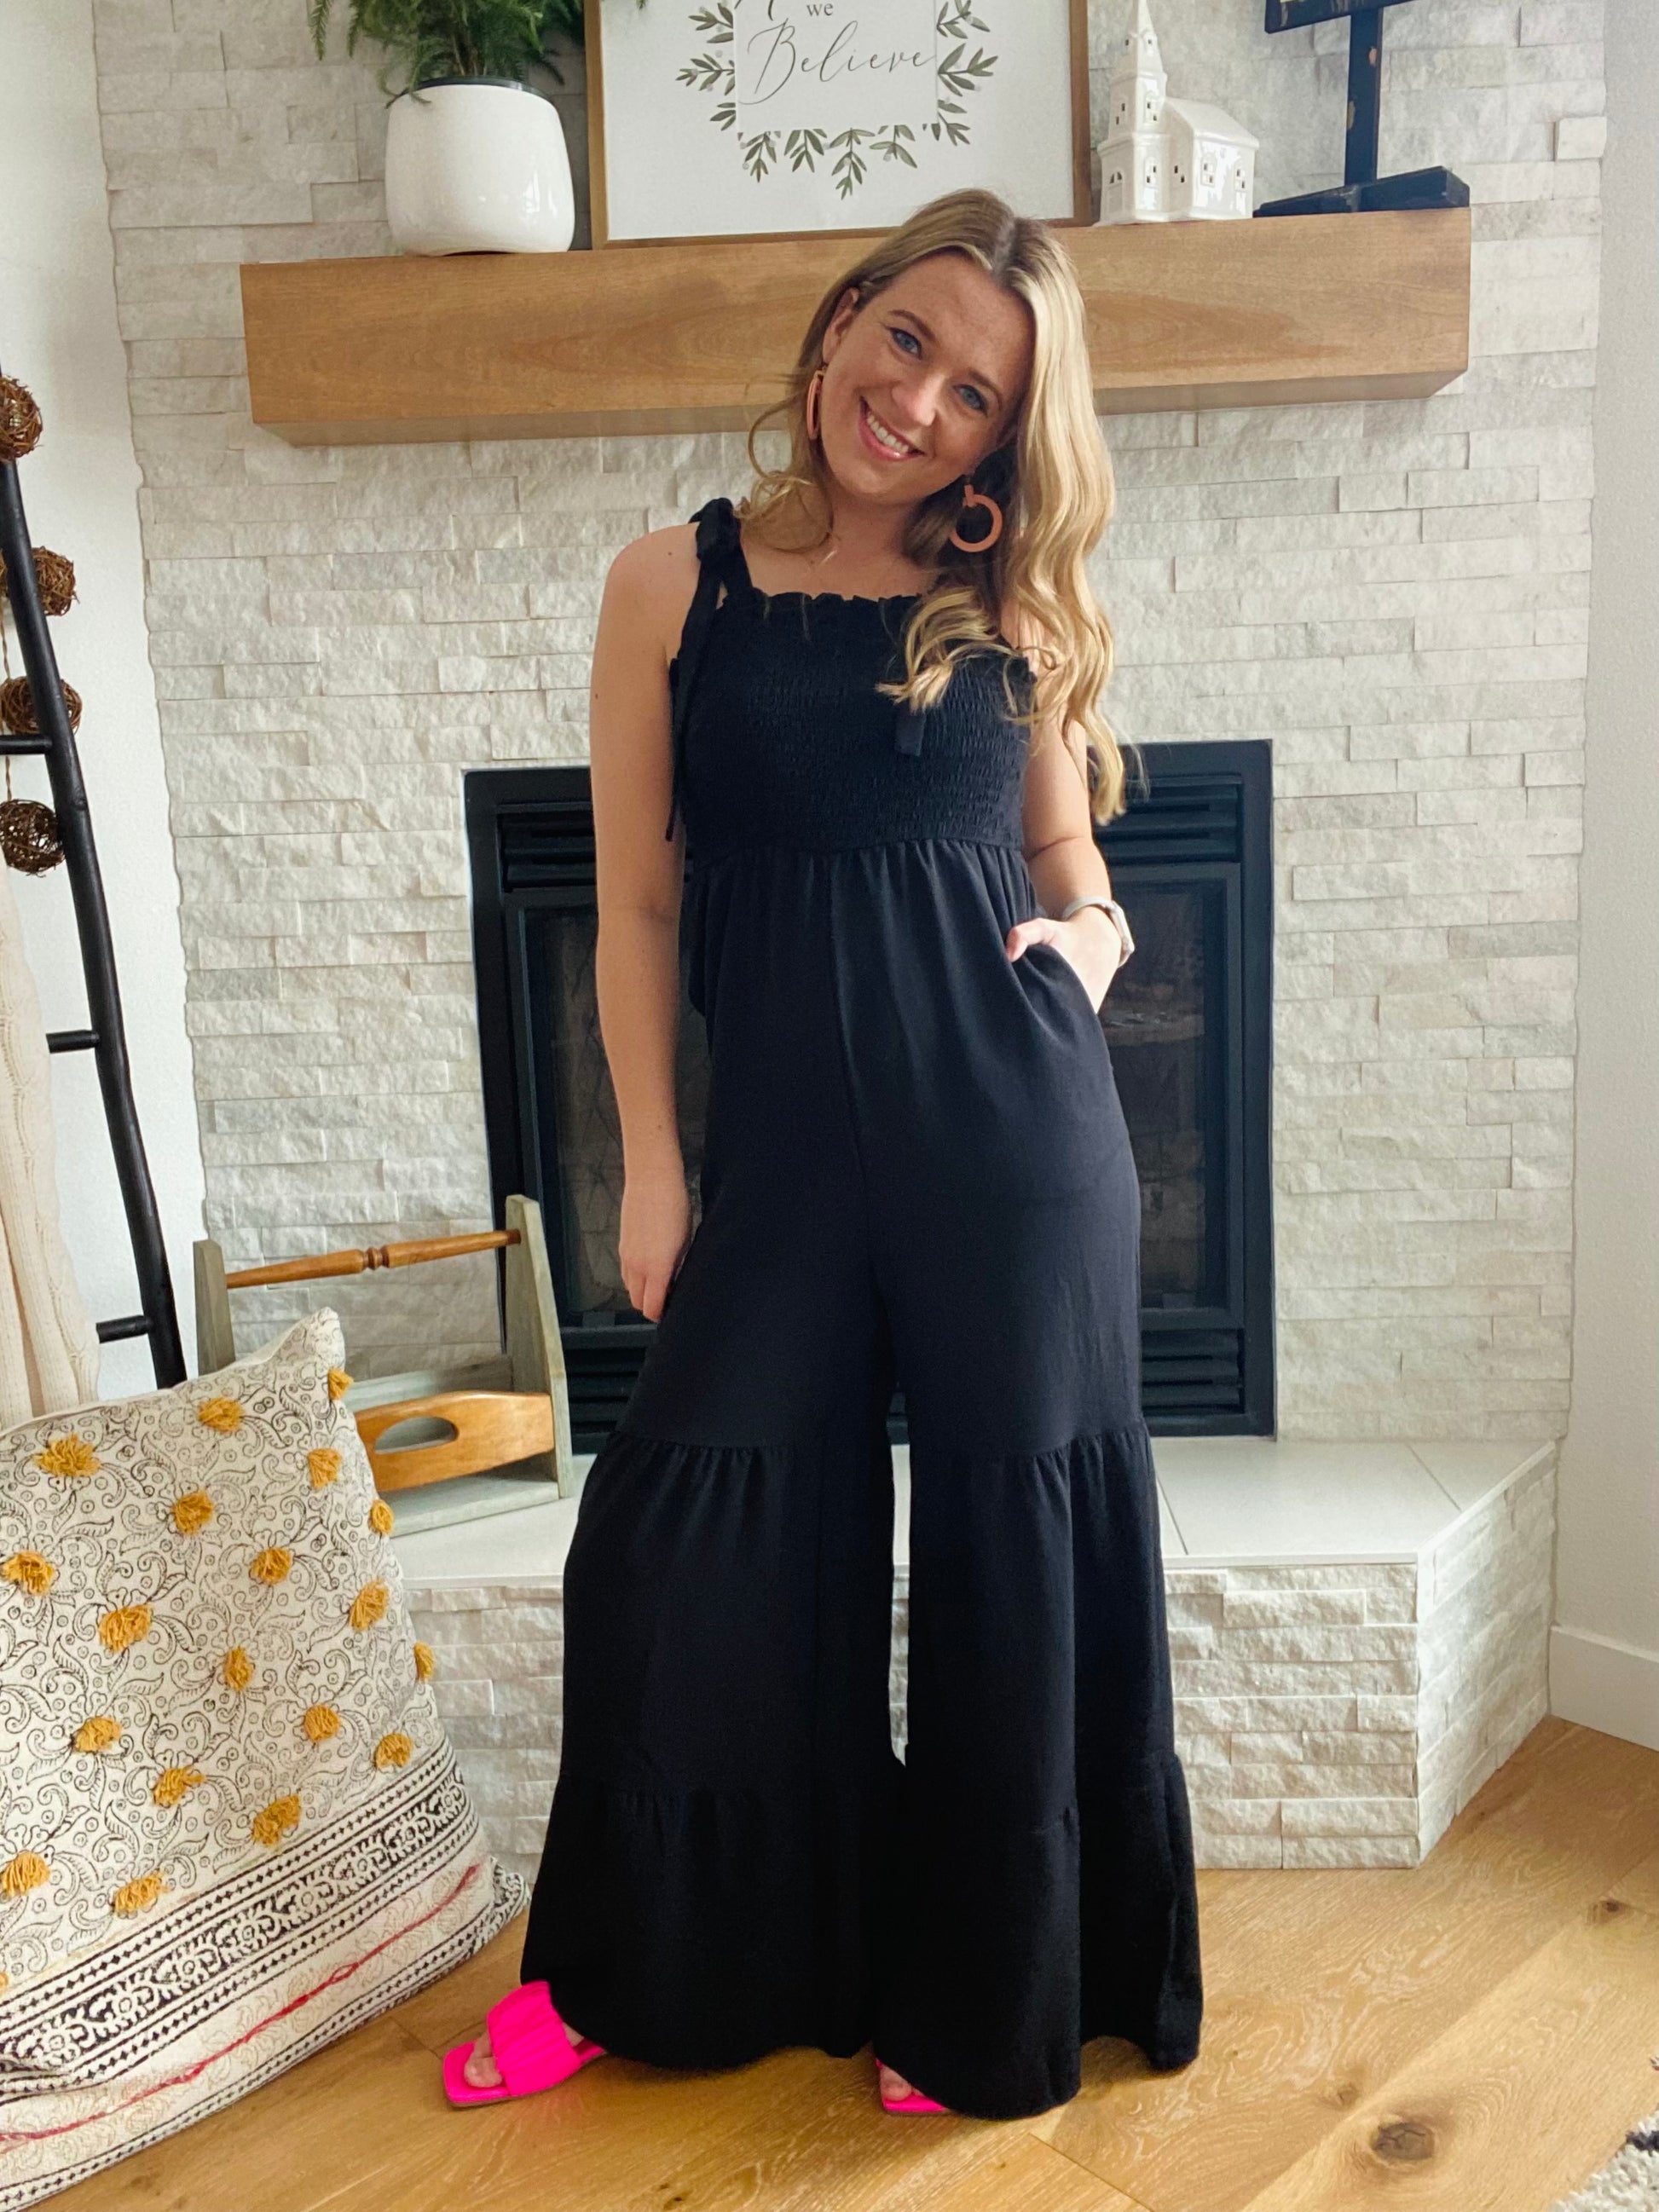 This Black Tiered Wide Leg Jumpsuit provides comfort and style. Made from a comfy fabric with a wide leg detail, you'll be ready for any occasion with this women's pant jumpsuit. Complete the look with a jean jacket and some fun sandals for a stylish, comfortable outfit.